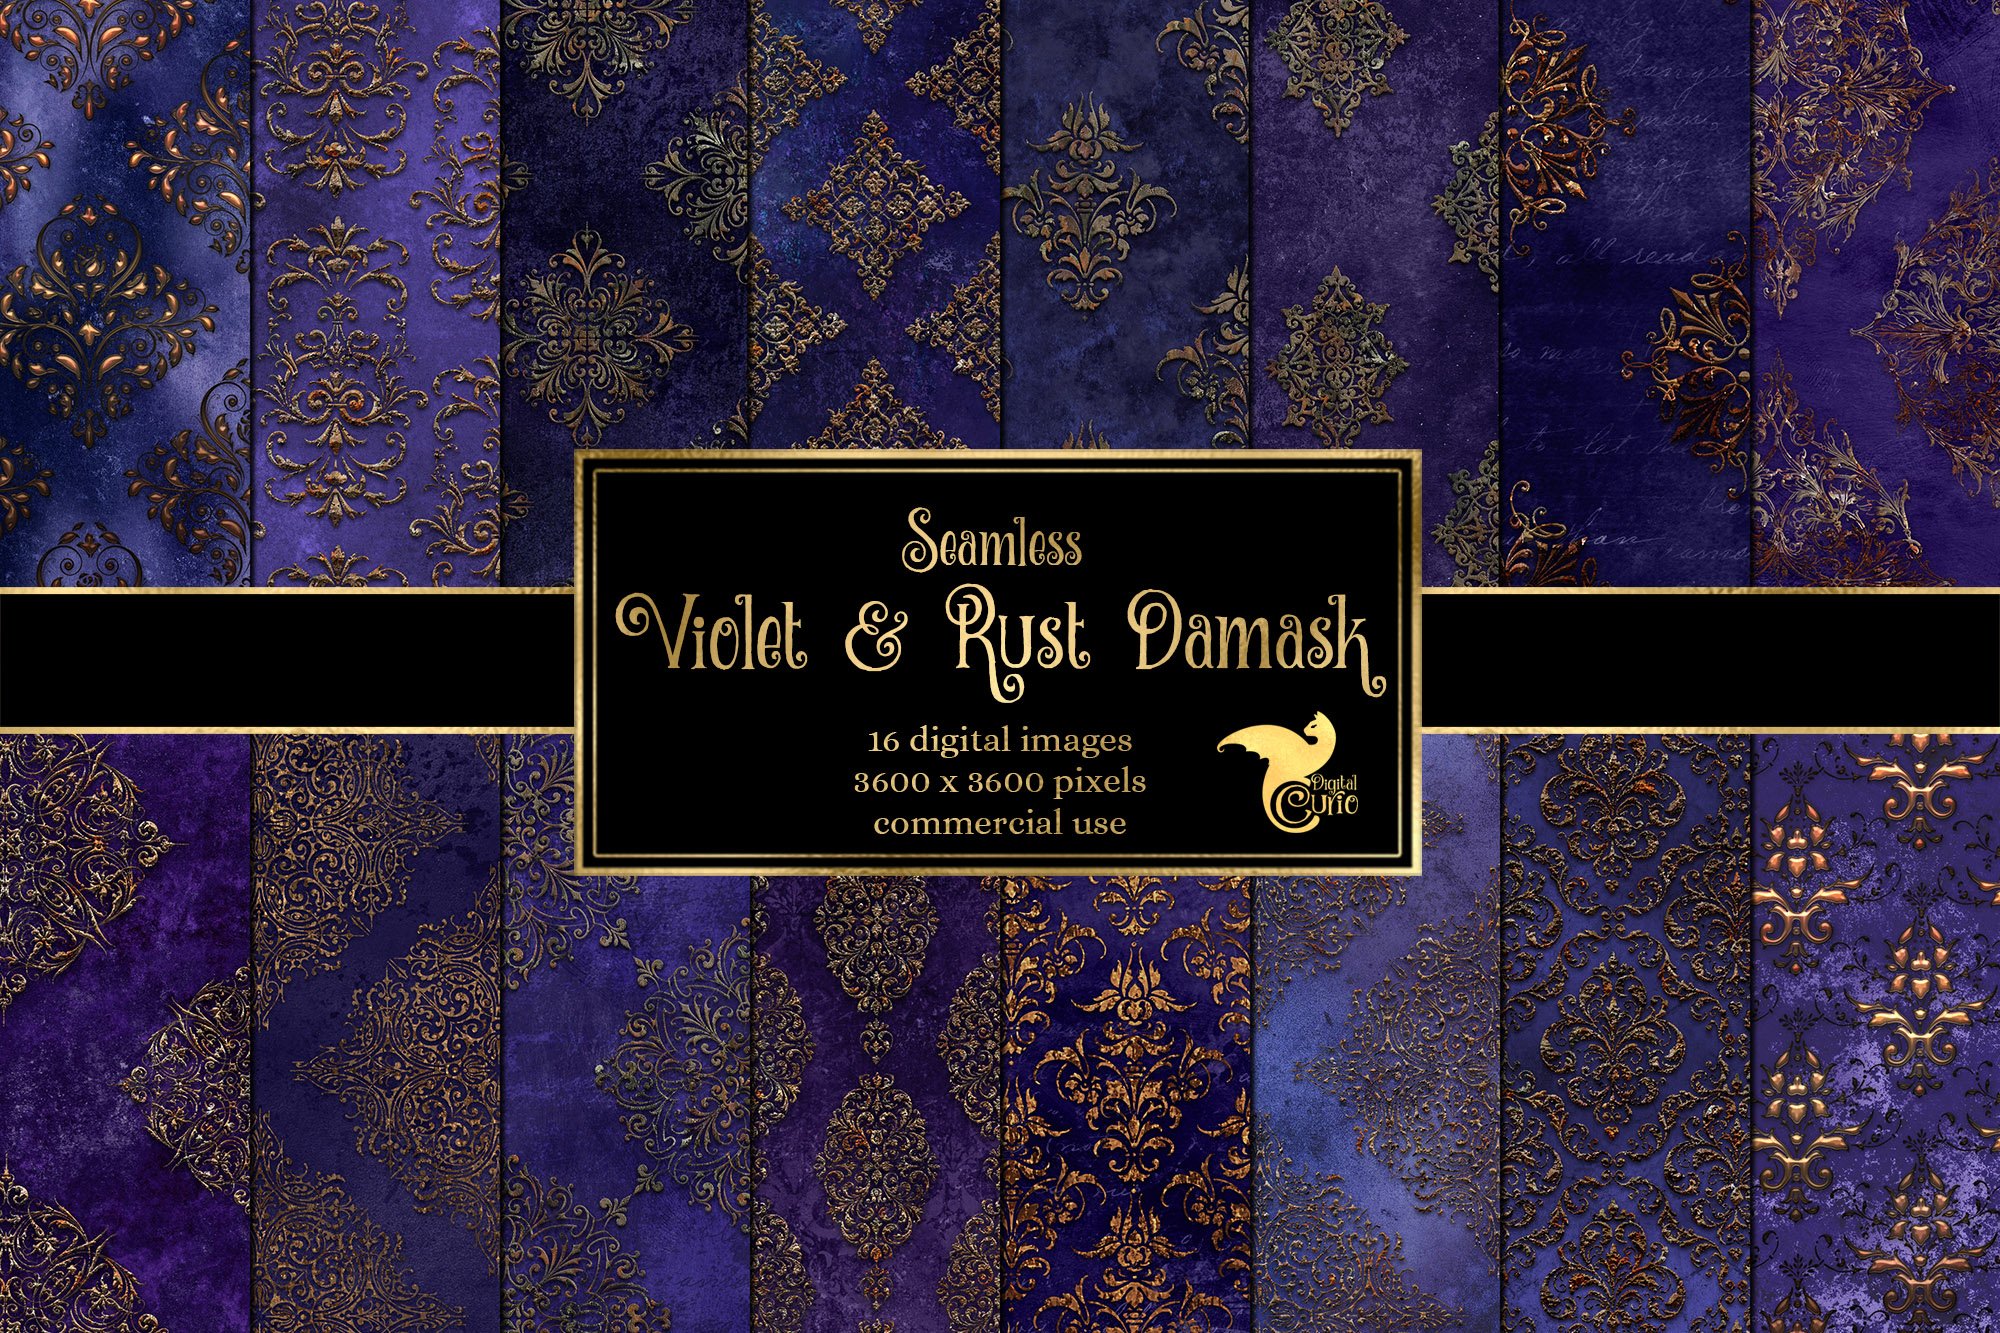 Violet and Rust Damask cover image.